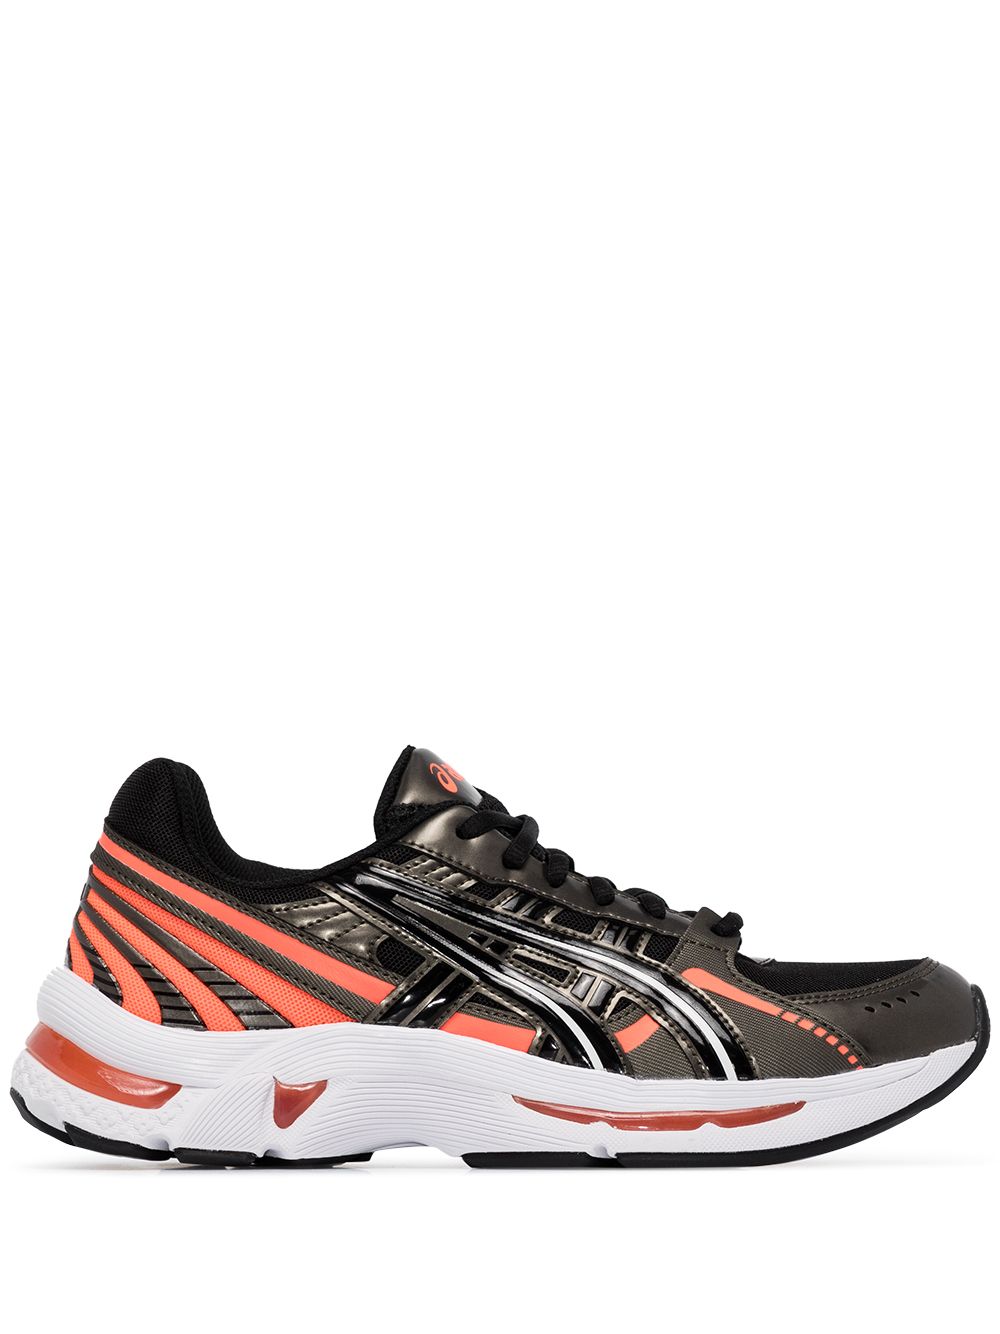 ASICS GEL-KYRIOS LACE-UP SNEAKERS